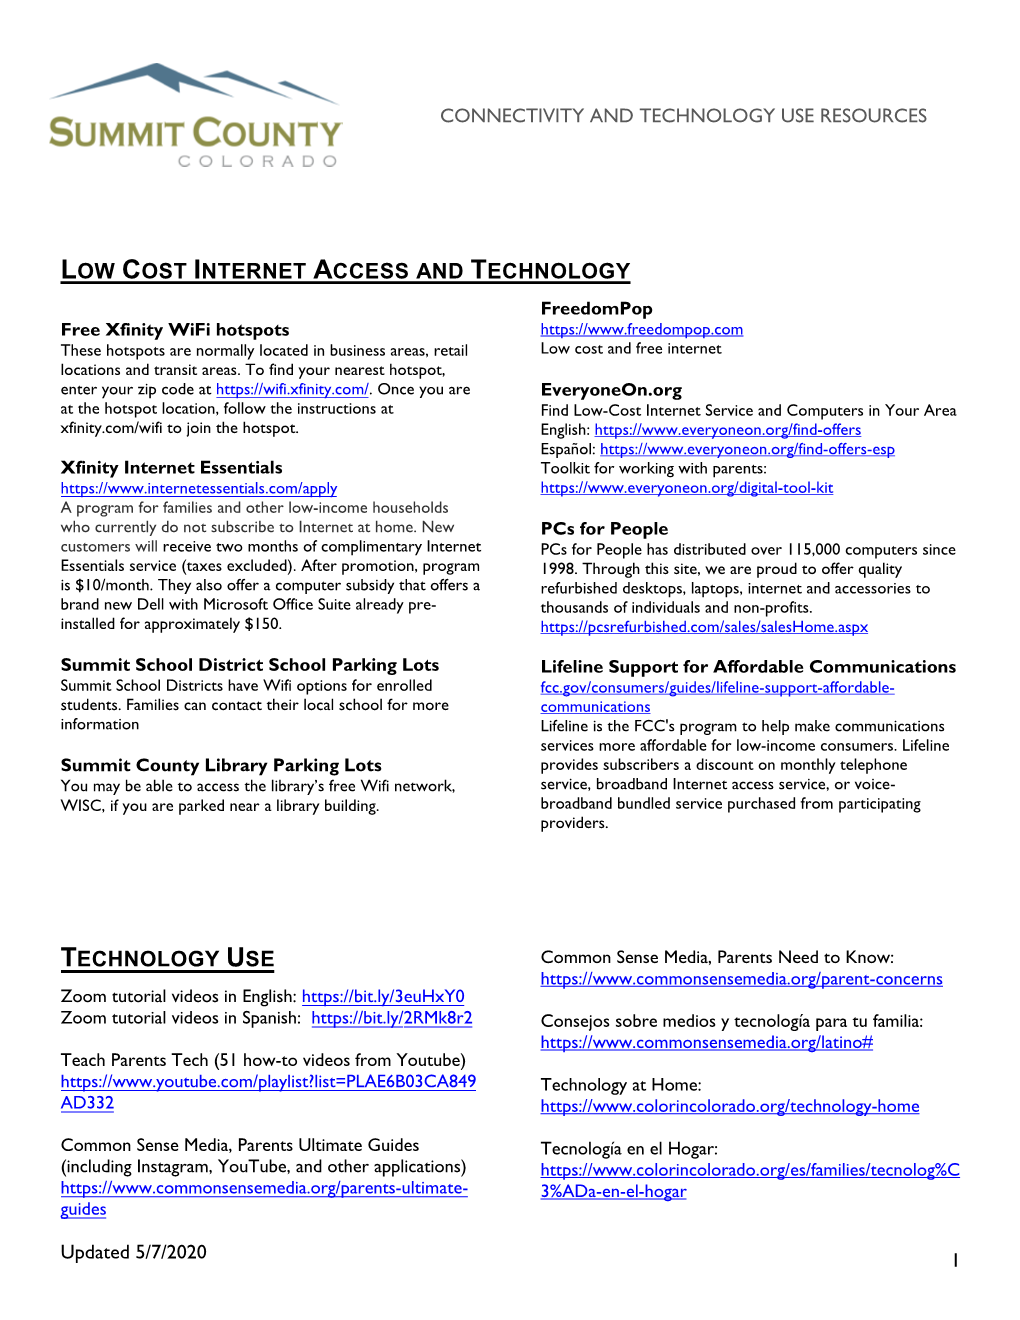 Low Cost Internet and Technology Resources